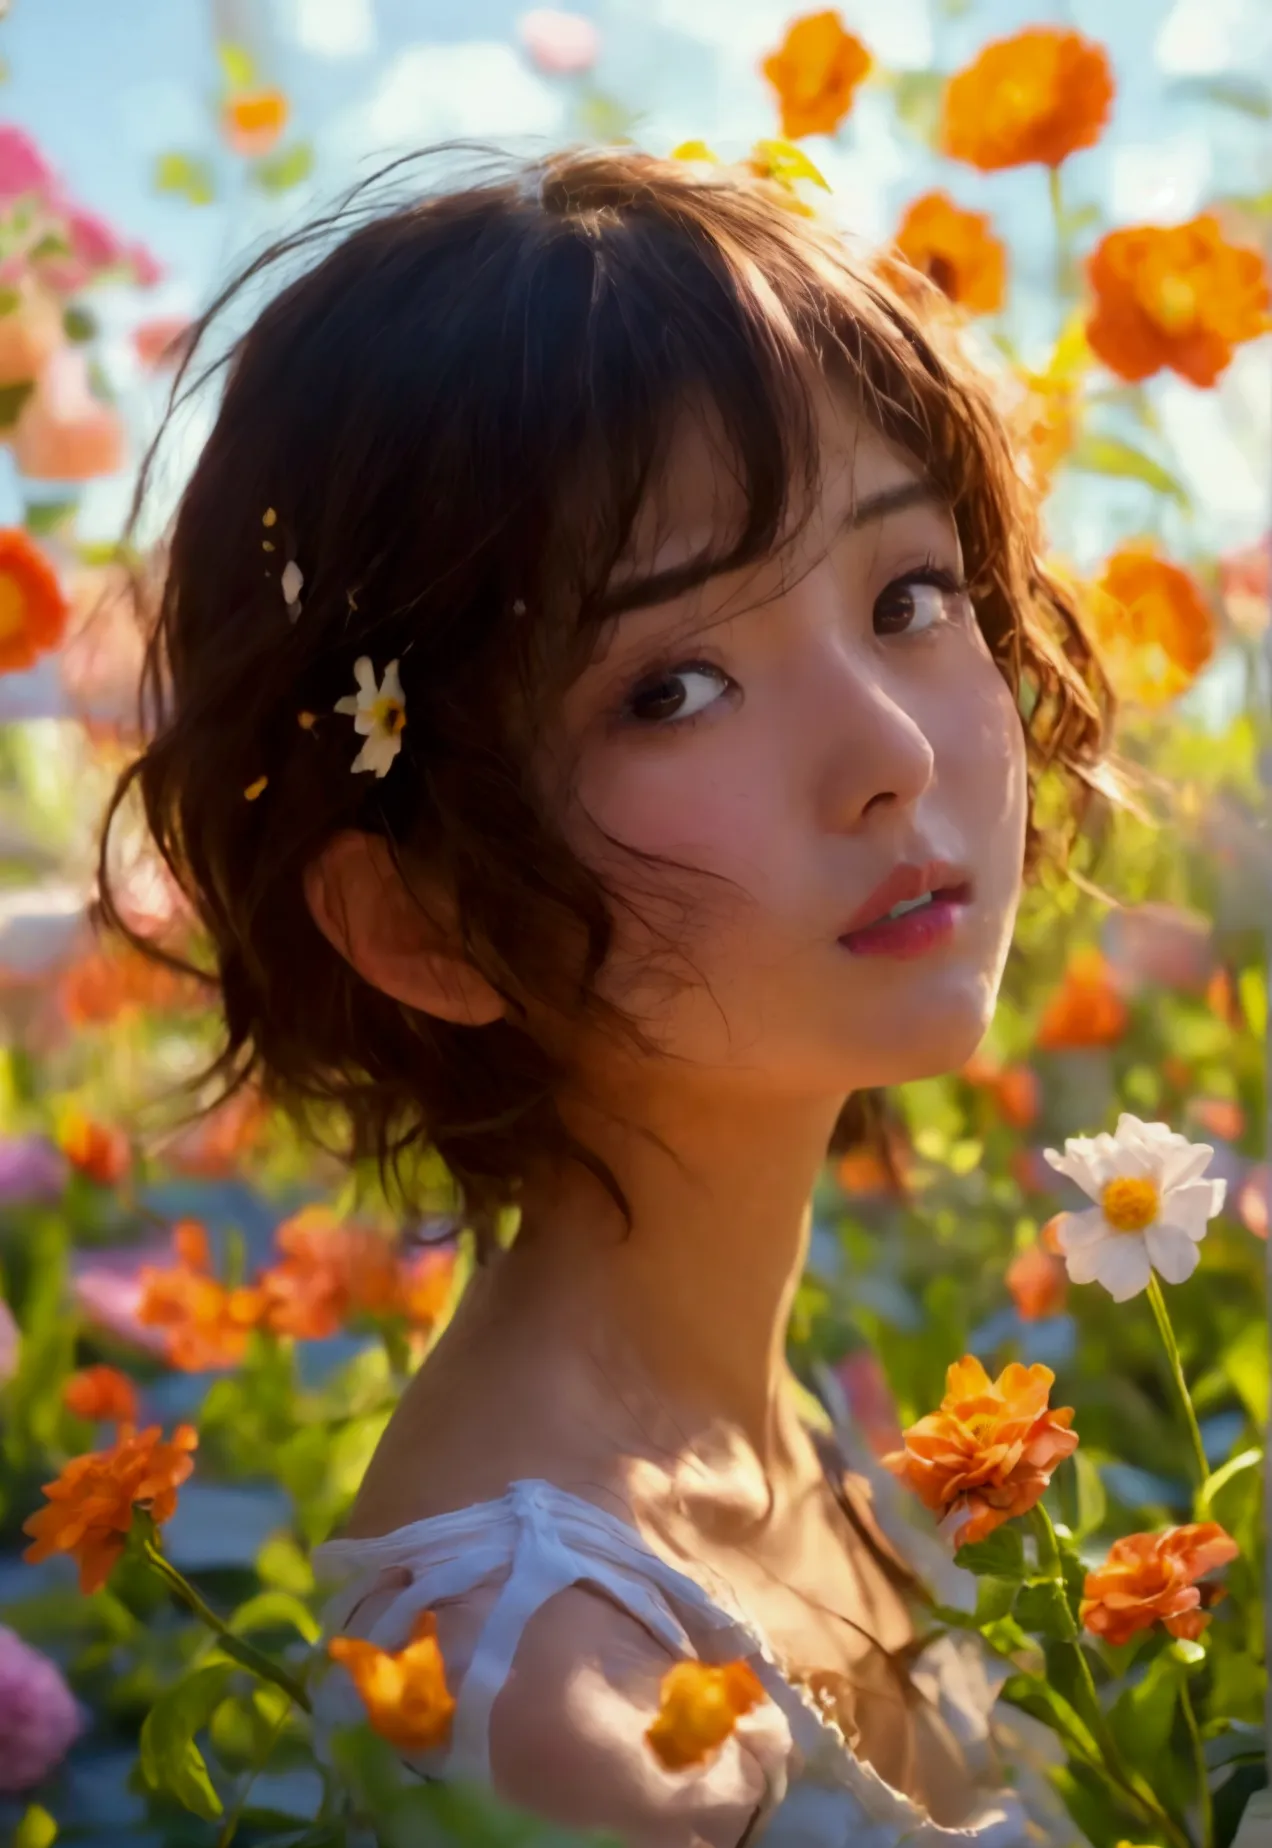 Cute girl surrounded by flowers、 Gravure Model、very 、Flat chest of a boy、Flower Field、Masterpiece: Same appearance and height as...